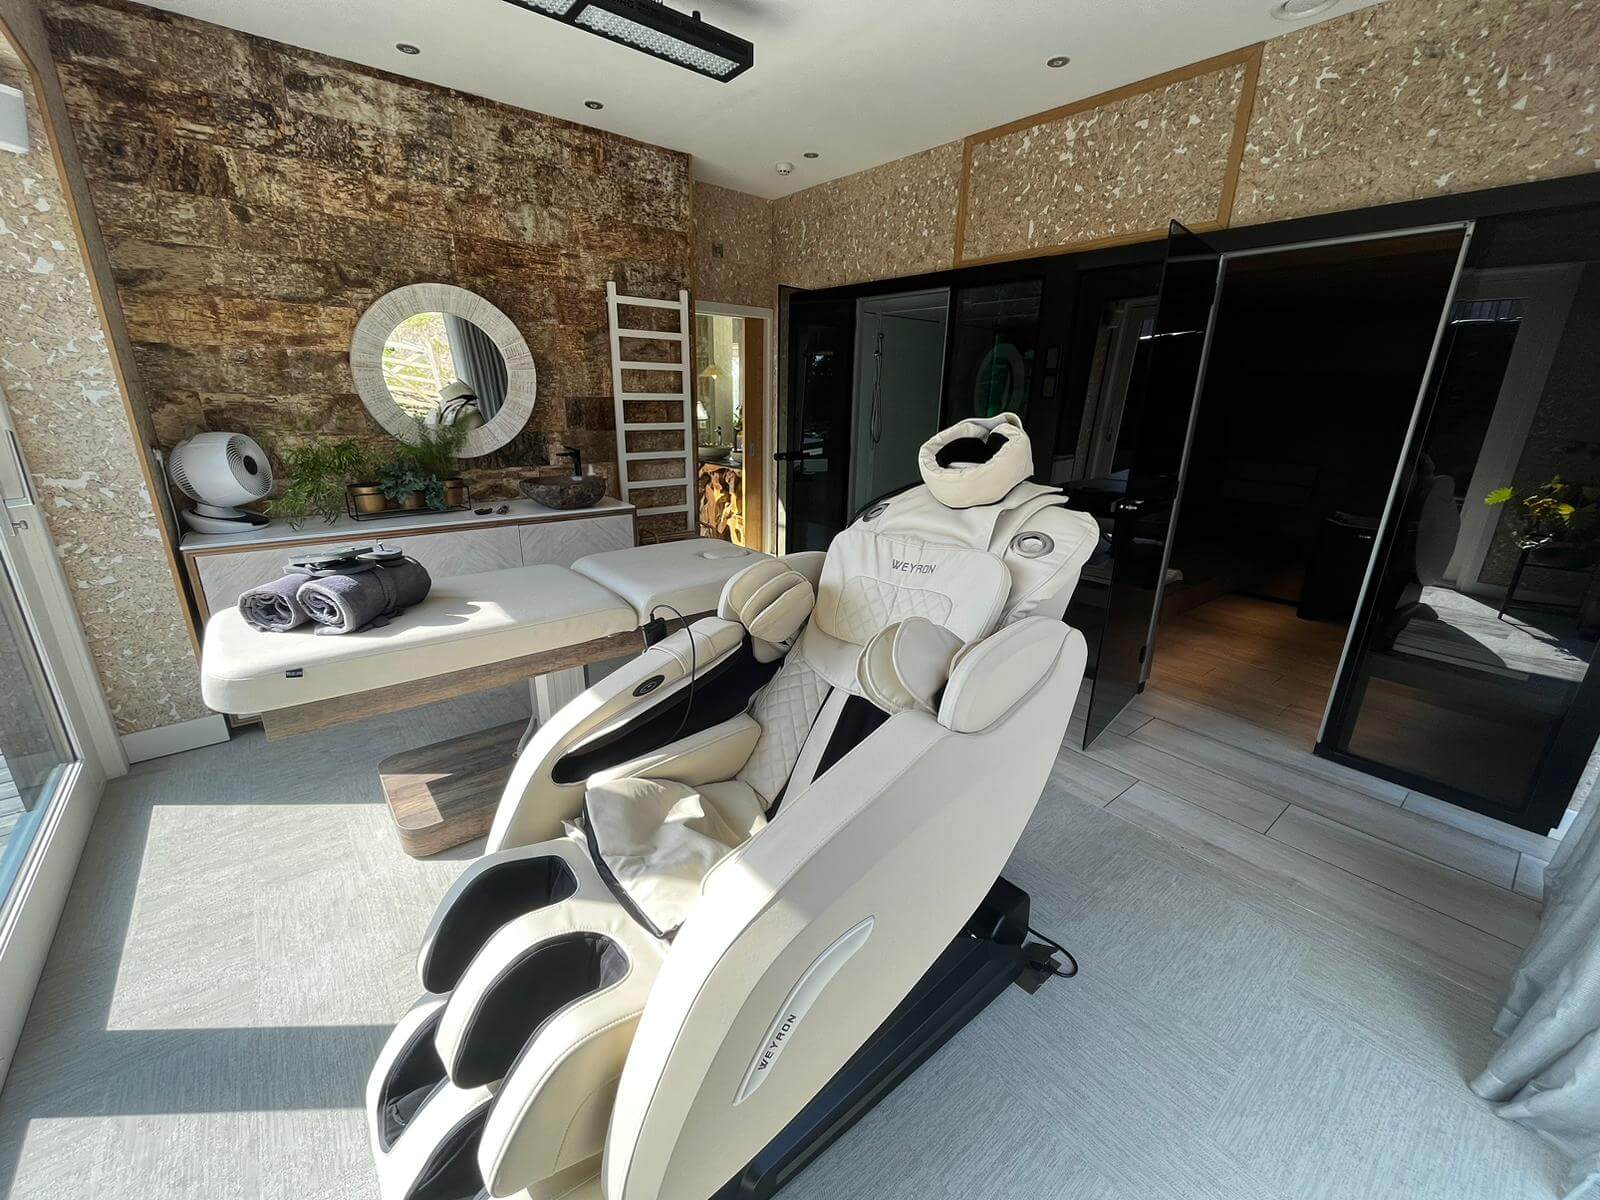 Our Spa Suite had its own treatment room